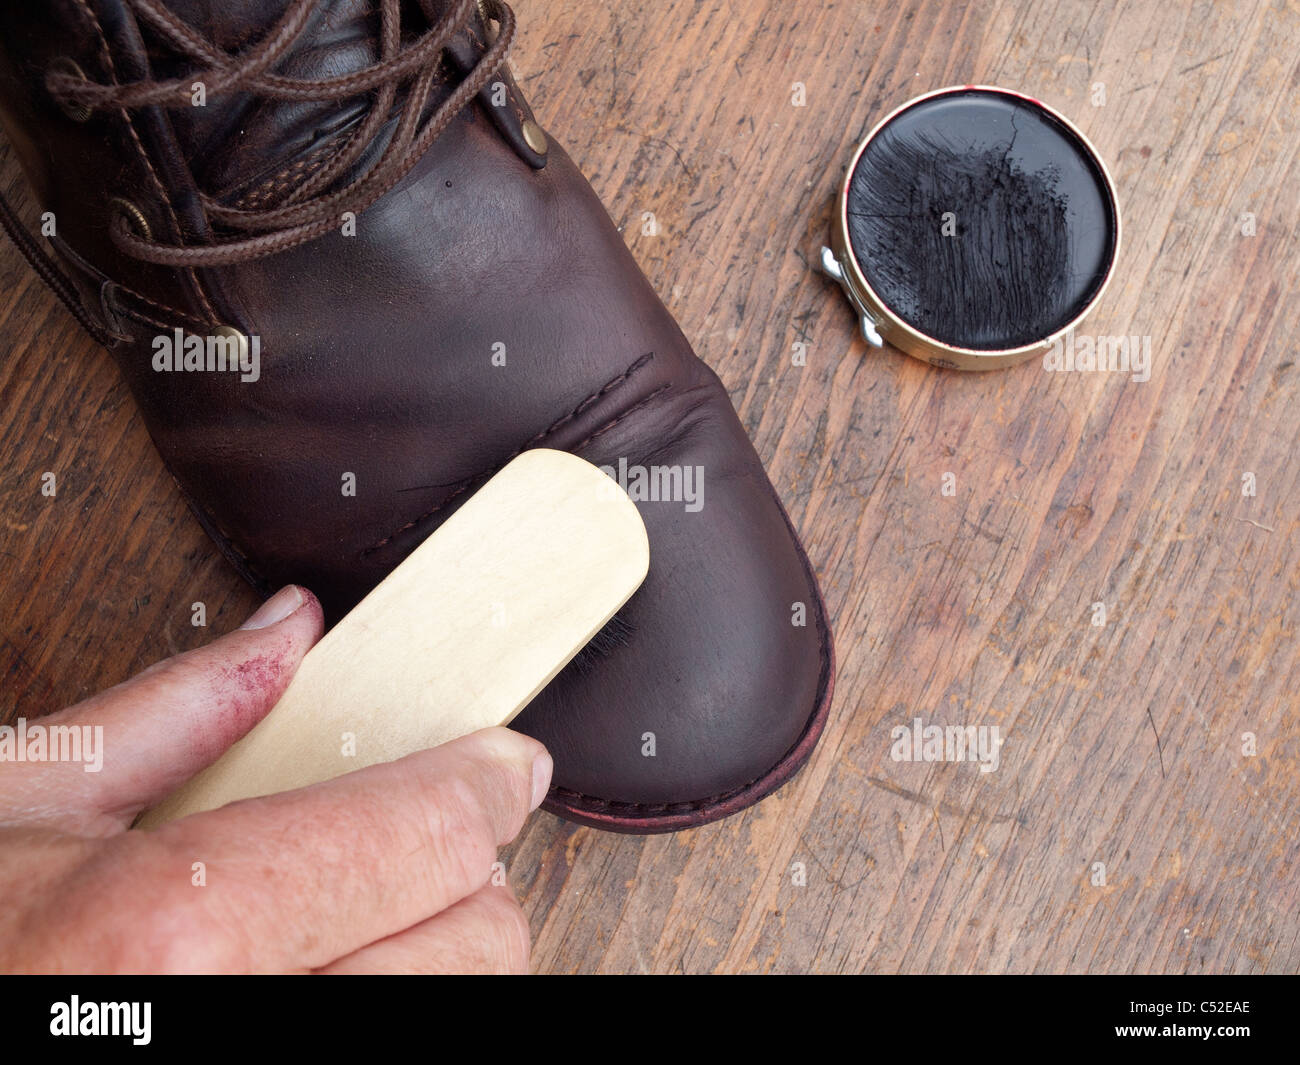 Applying polish to a brown boot using a brush Stock Photo